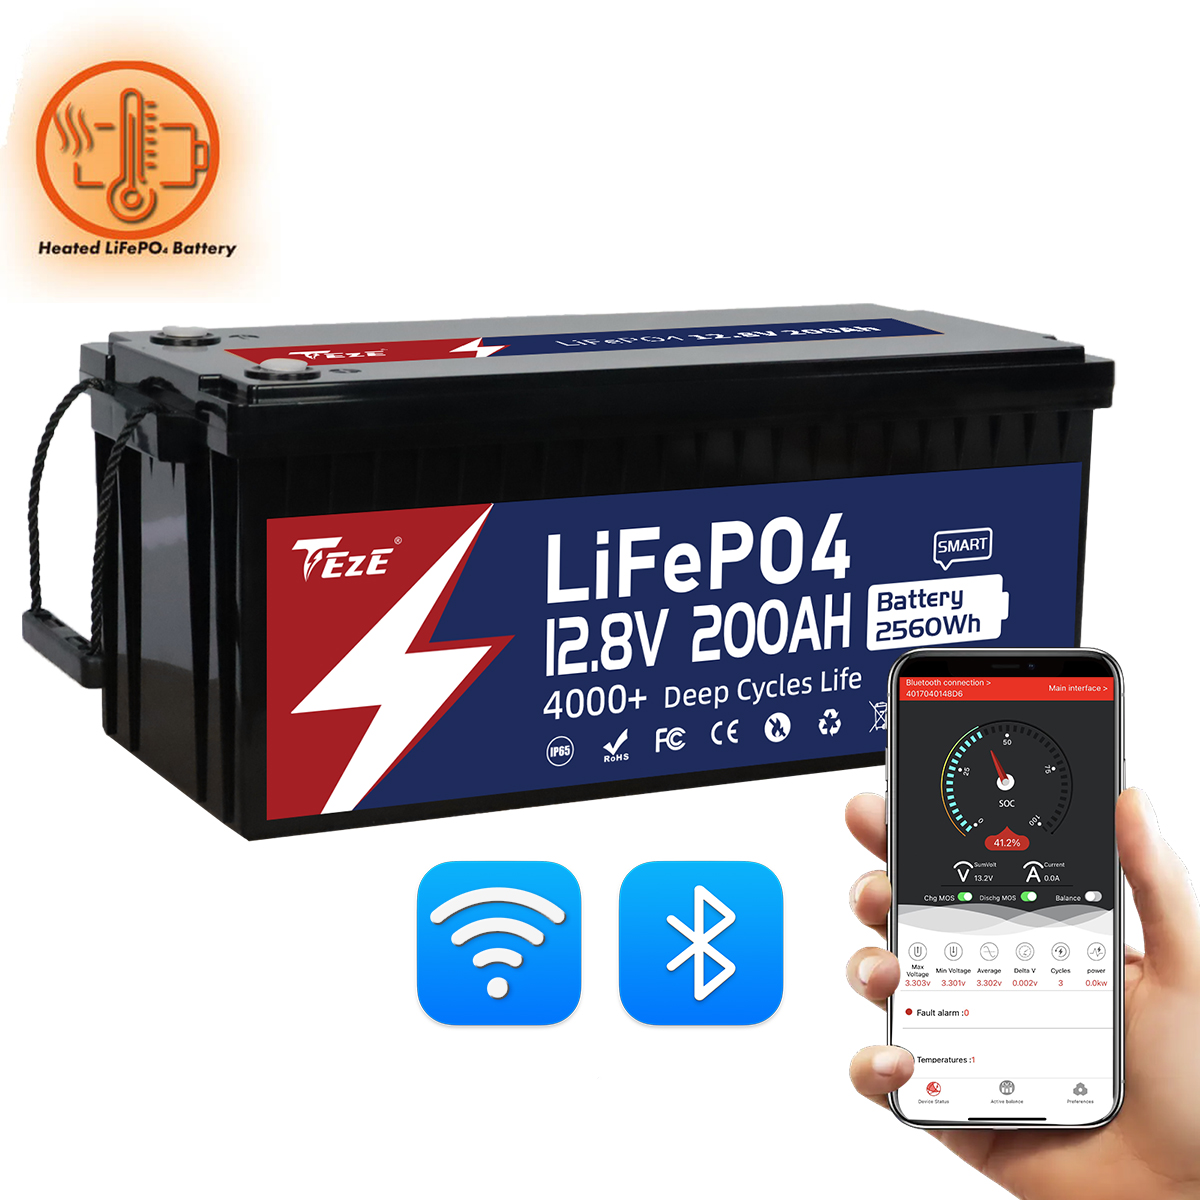 TezePower 12V 200Ah LiFePO4 Battery with RS485/RS232/CAN Communication Ports, WiFi and Bluetooth, Self-heating and Active Balancer, Built-in 200A Daly BMS(WiFi Built-in Version)-TezePower